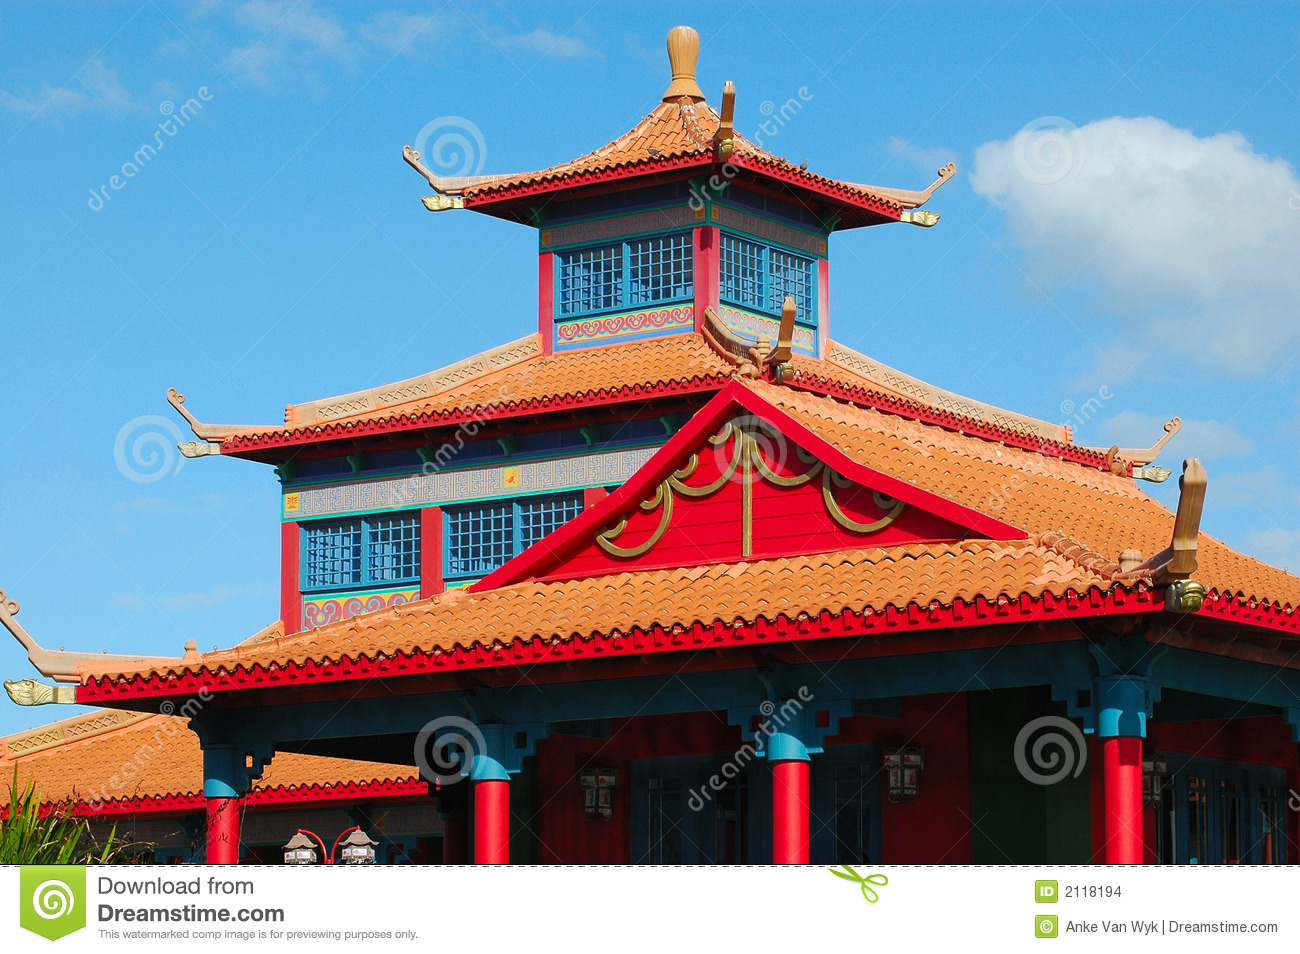 HQ Asian Architecture Wallpapers | File 474.28Kb